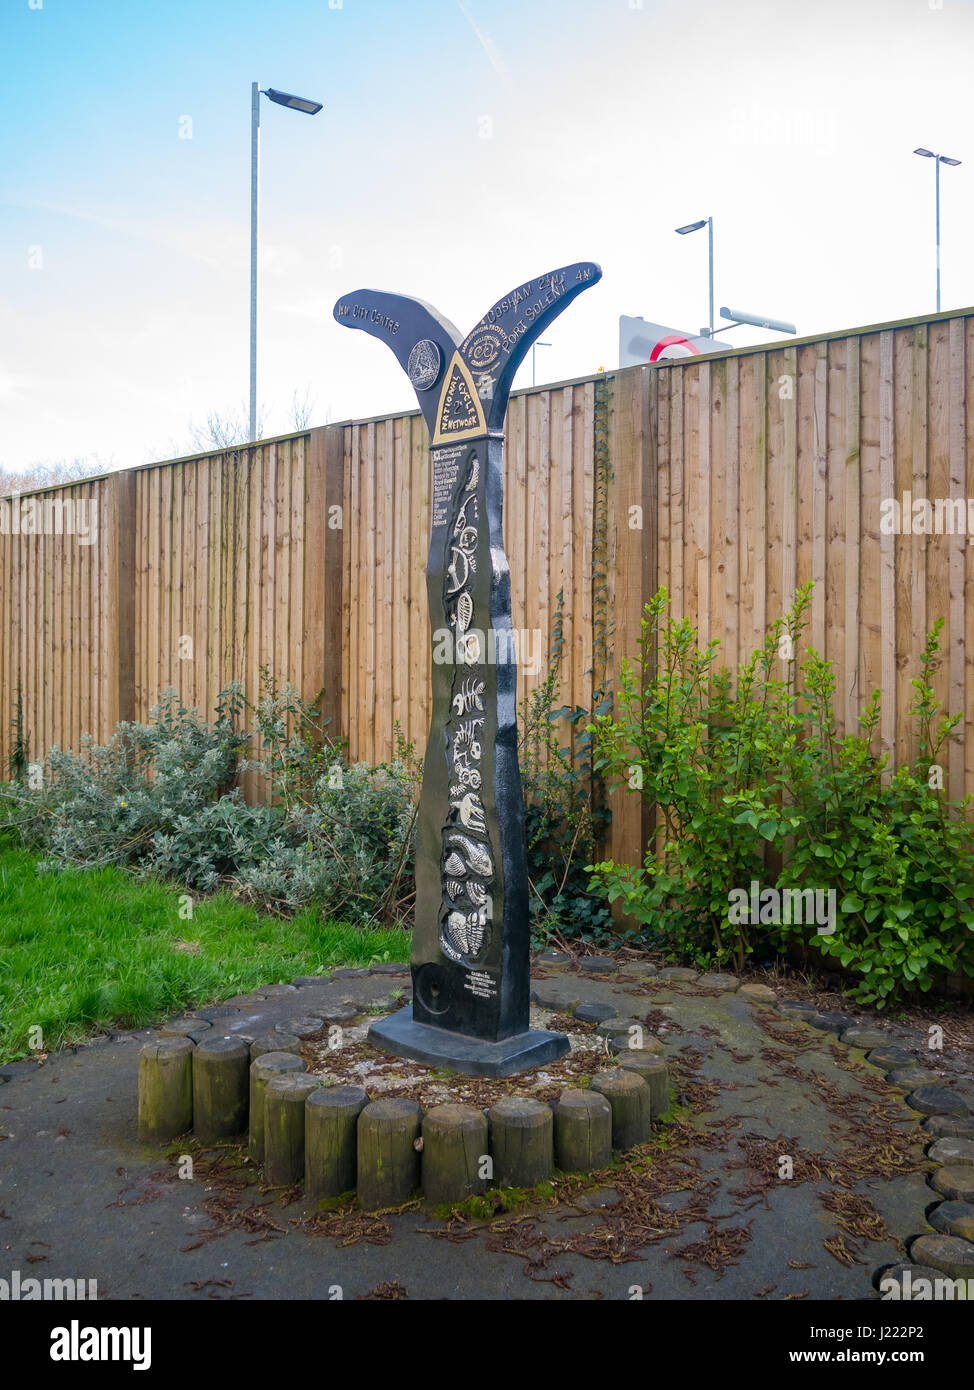 A sculpture marking Sustrans national cycle route number 22 in Stamshaw, Portsmouth Stock Photo